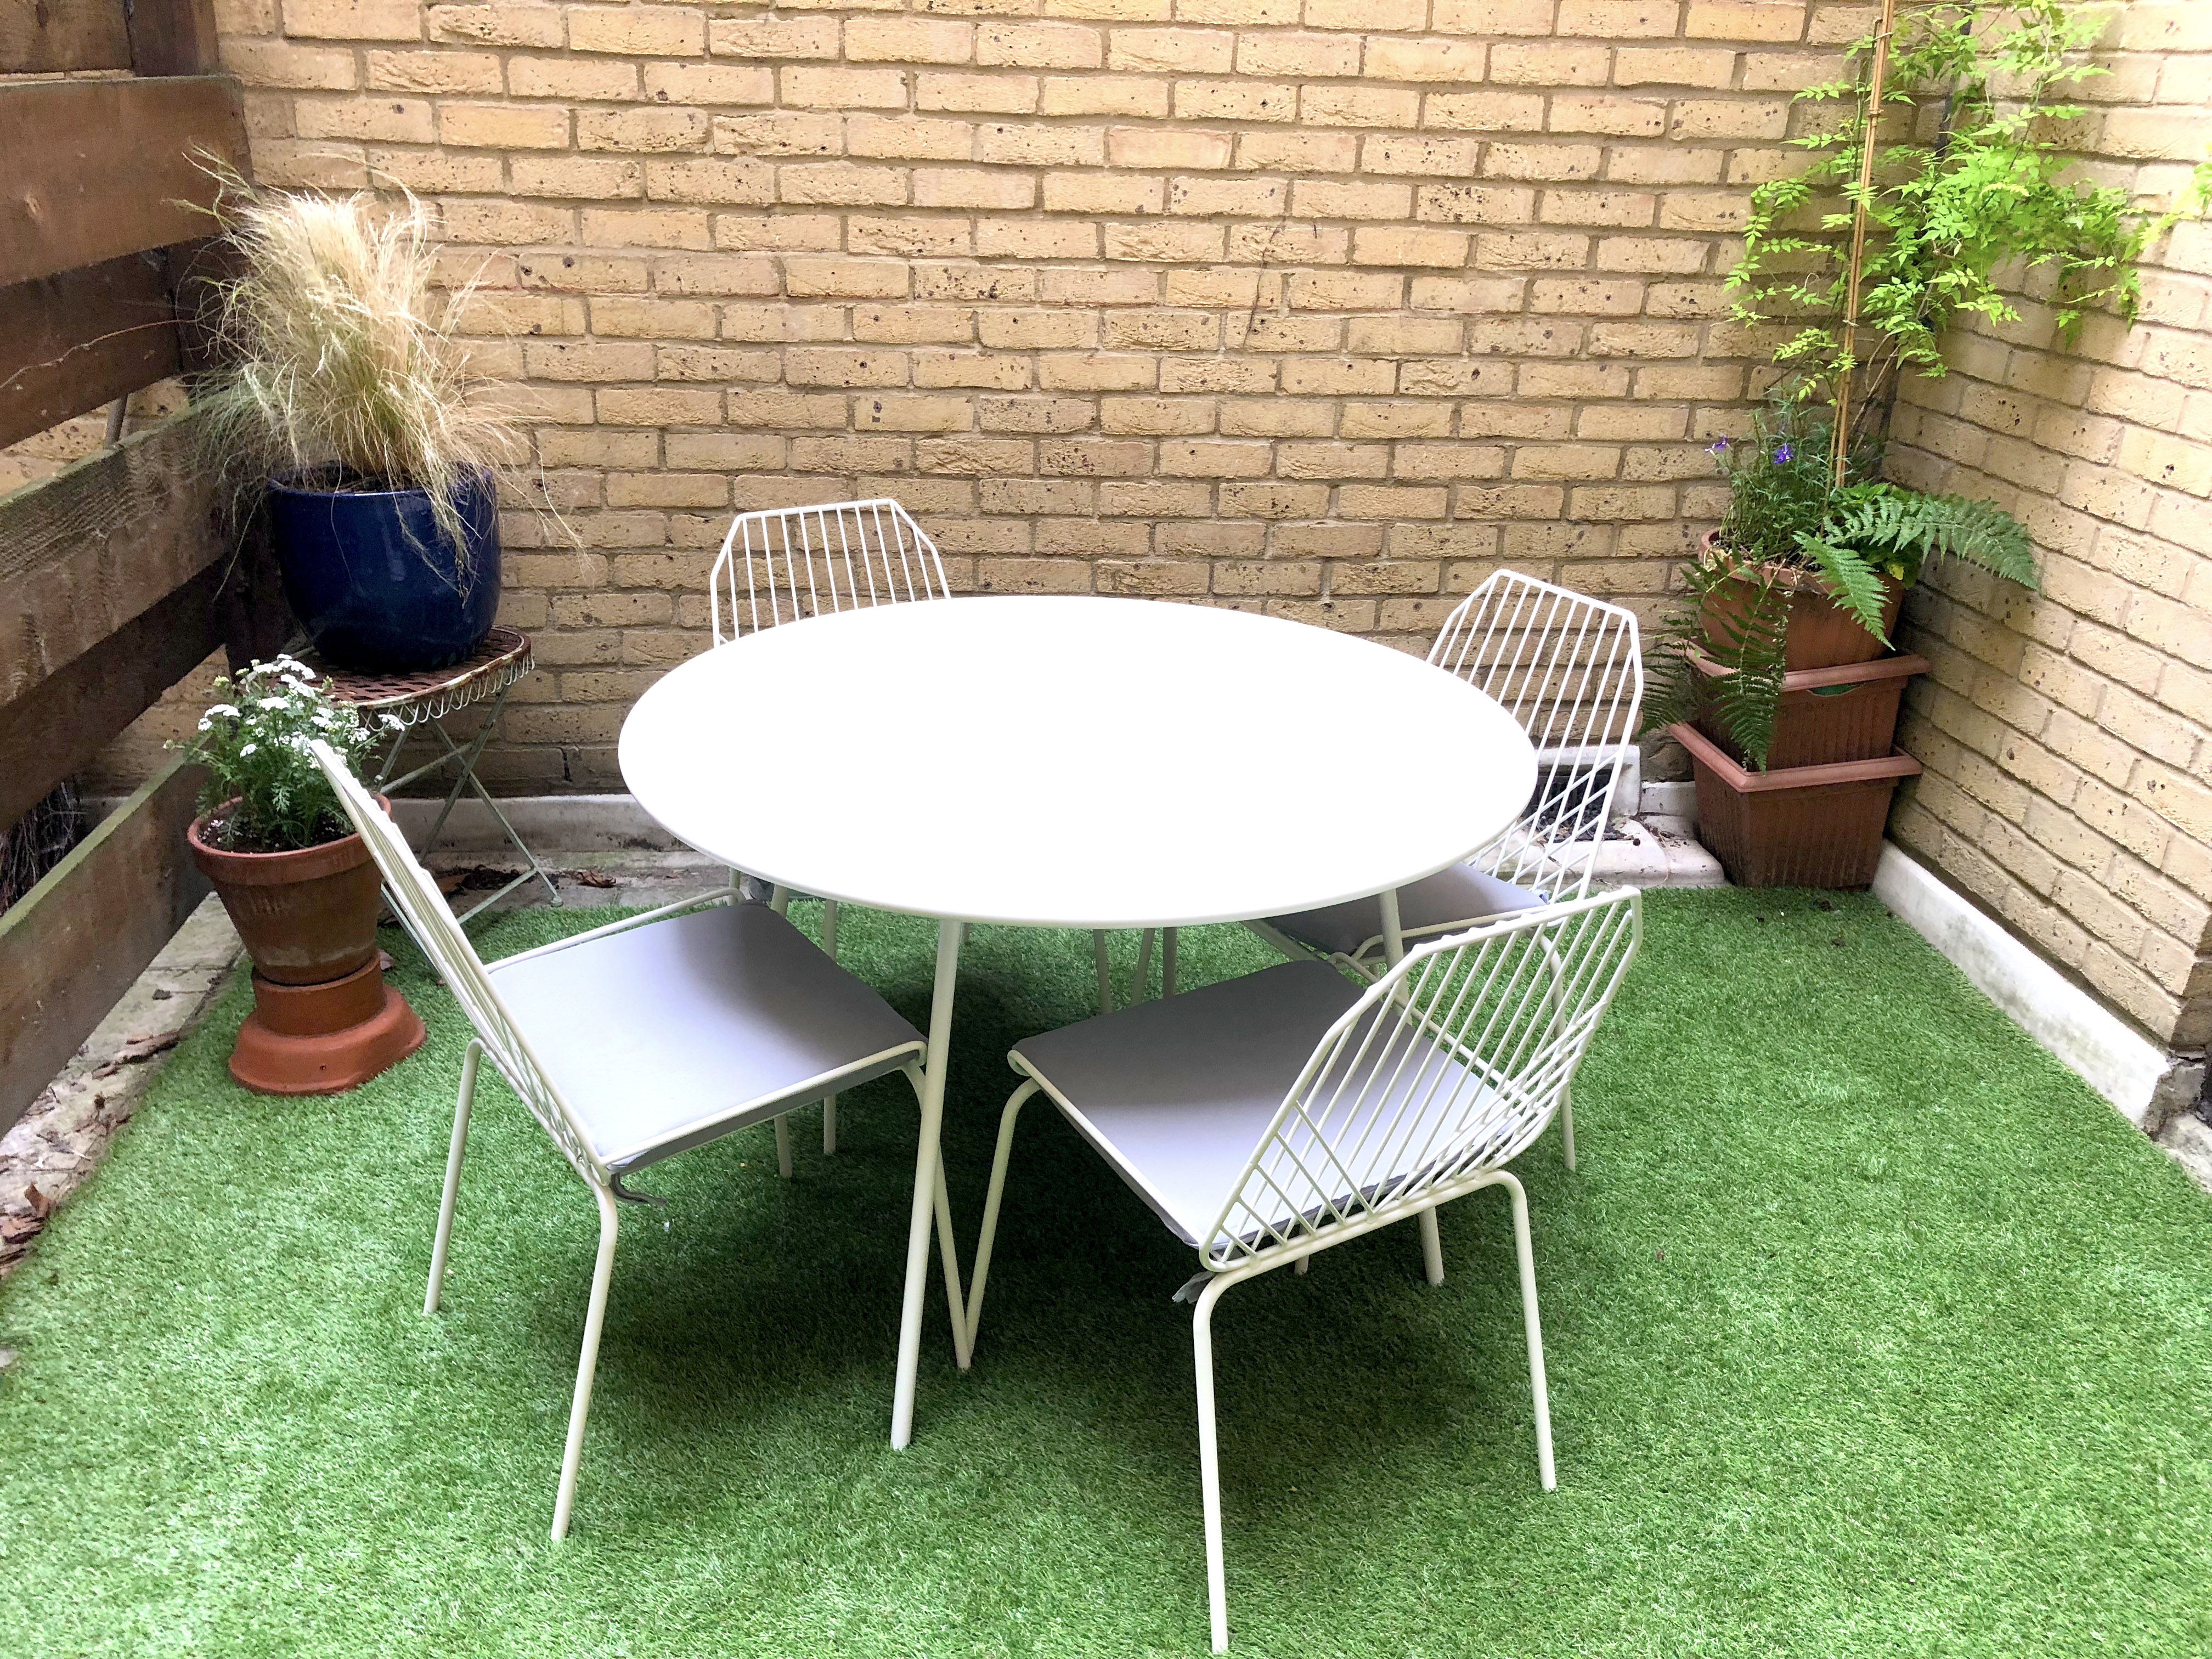 M&S White outdoor modern table and chairs with grey seat cushions